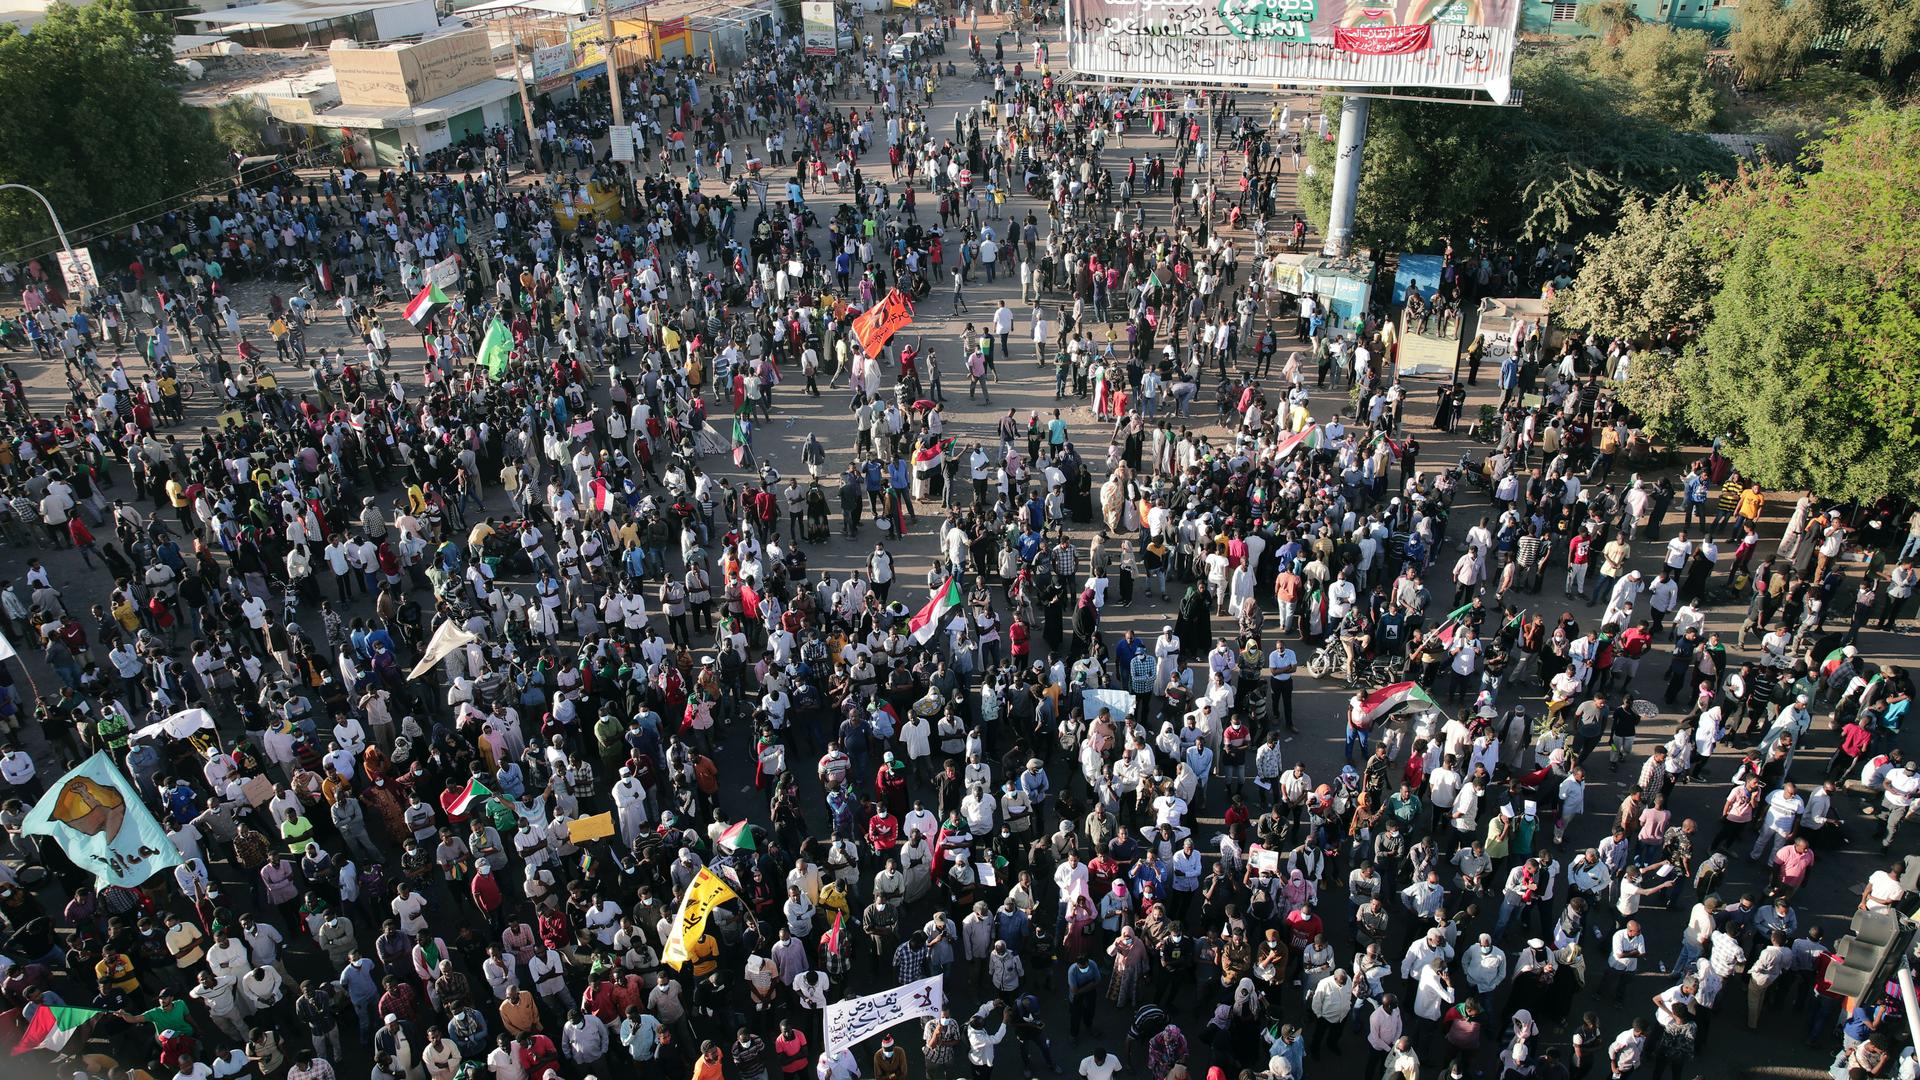 Thousands of protesters take to the streets to renew their demand for a civilian government in the Sudanese capital Khartoum, Nov. 25, 2021. The rallies came just days after the military signed a power-sharing deal with the prime minister, after releasing